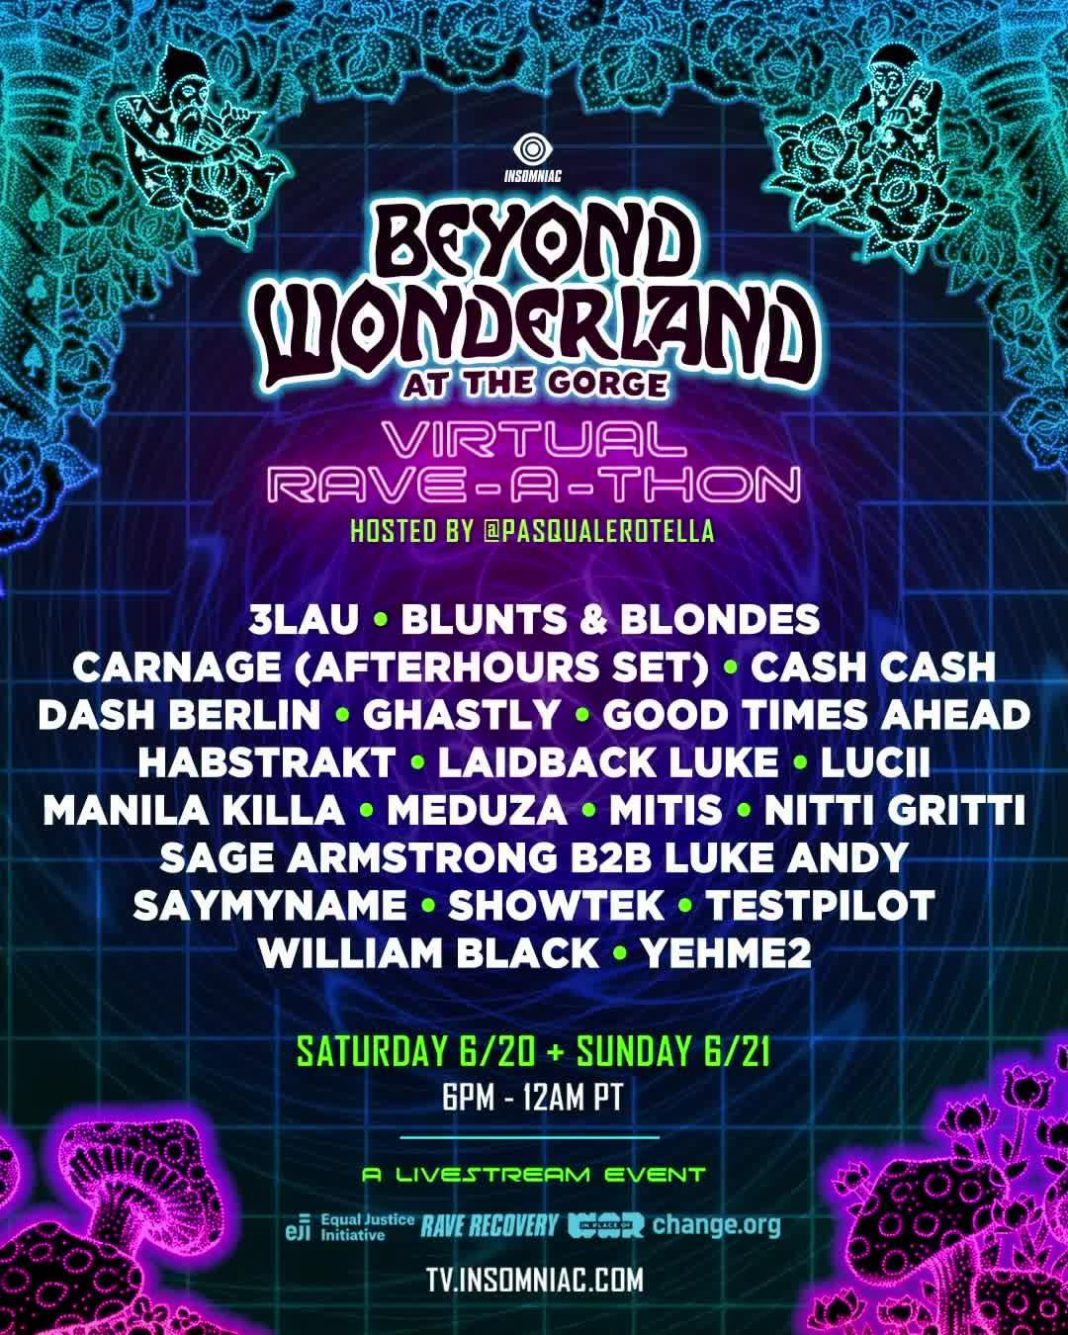 Beyond Wonderland at The Gorge Virtual Rave-A-Thon Lineup & Schedule